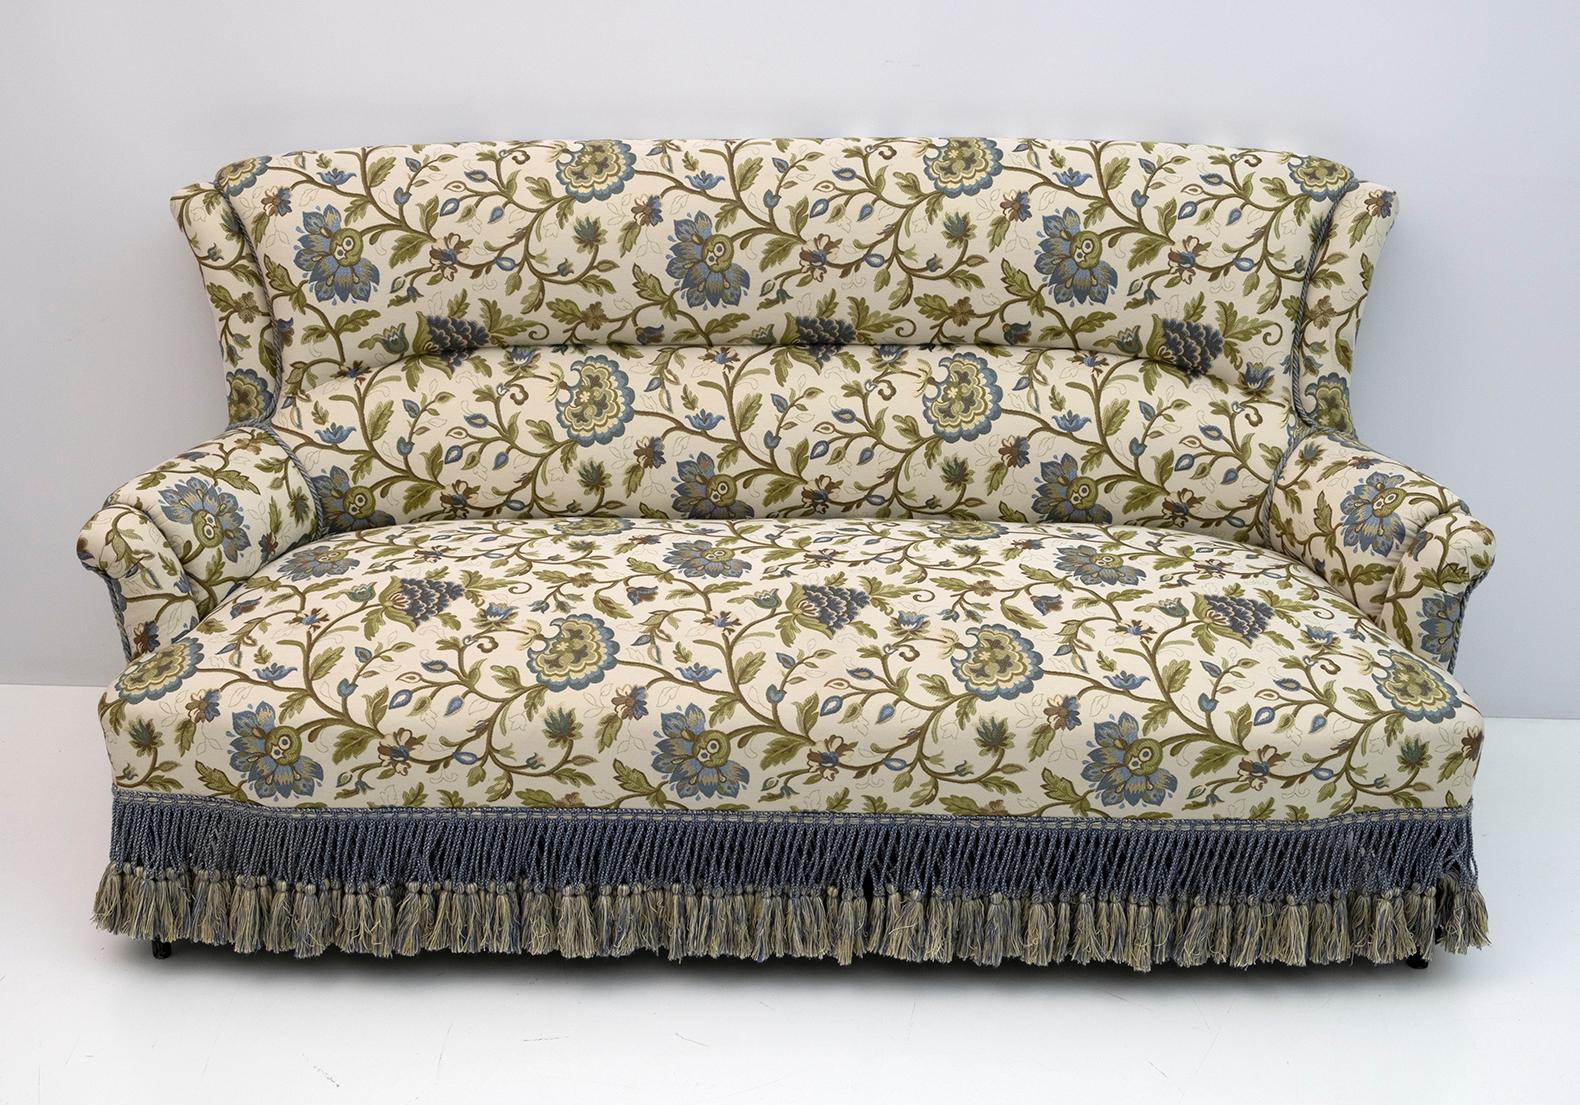 French sofa from the 19th century, Napoleon III period. The sofa has been restored and the upholstery replaced with a beautiful Italian Brocade. France, 1870.